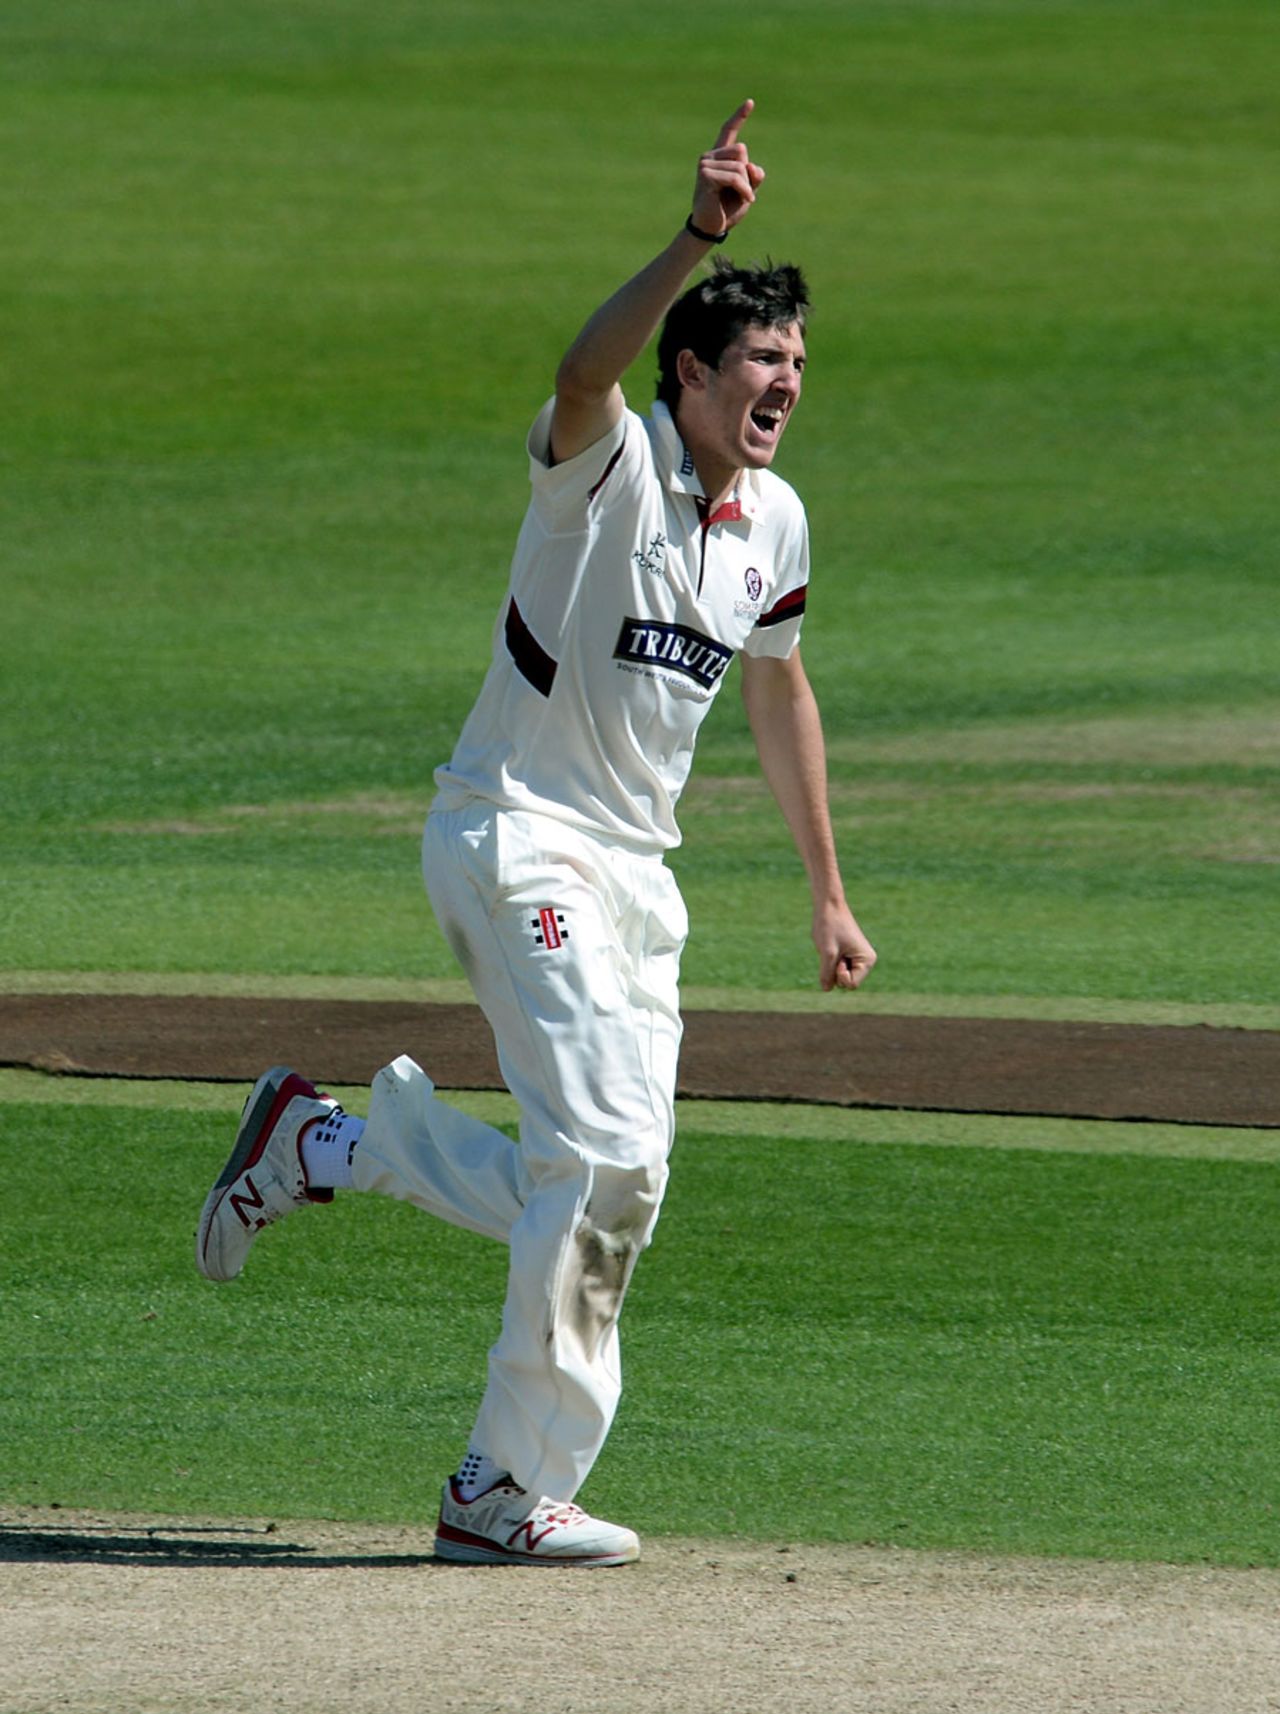 Craig Overton chipped away for Somerset, Yorkshire v Somerset, LV= County Championship, Division One, Headingley, 2nd day, September 2, 2015